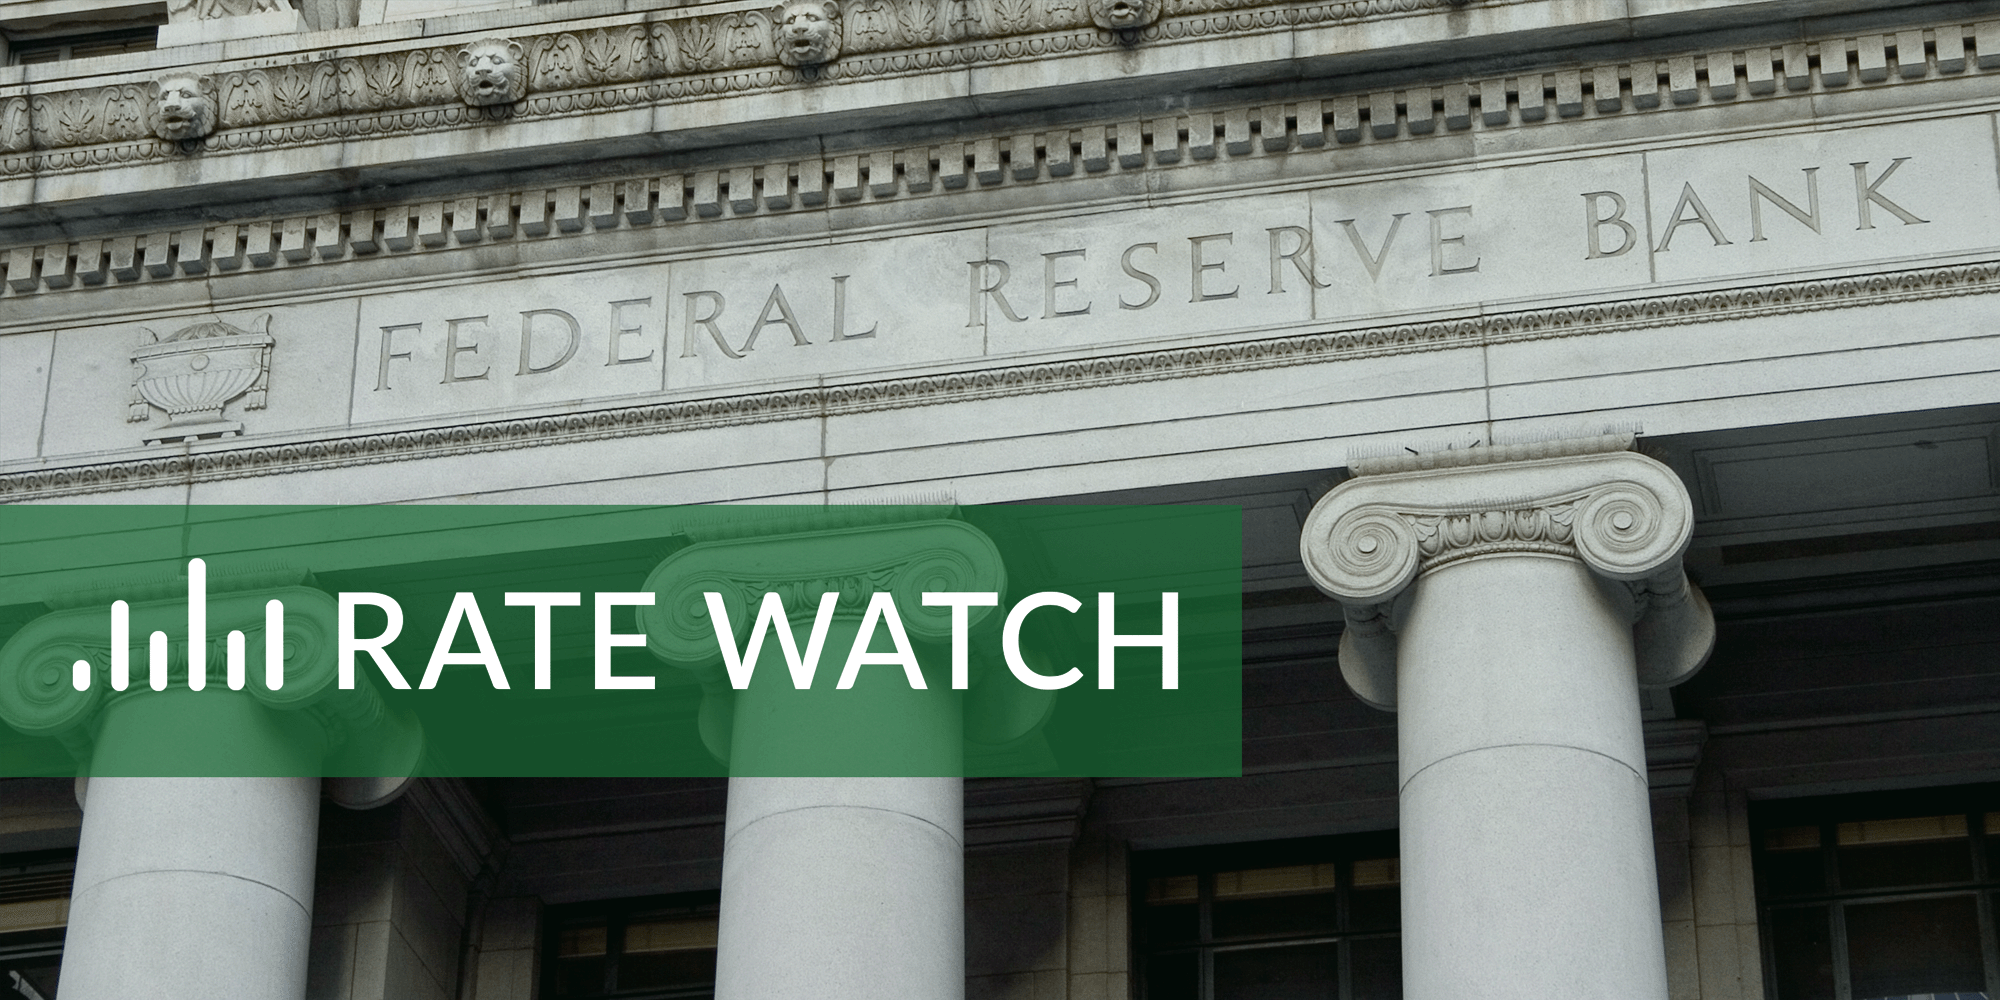 Rate Watch: The Fed holds rates steady and offers hints for the future